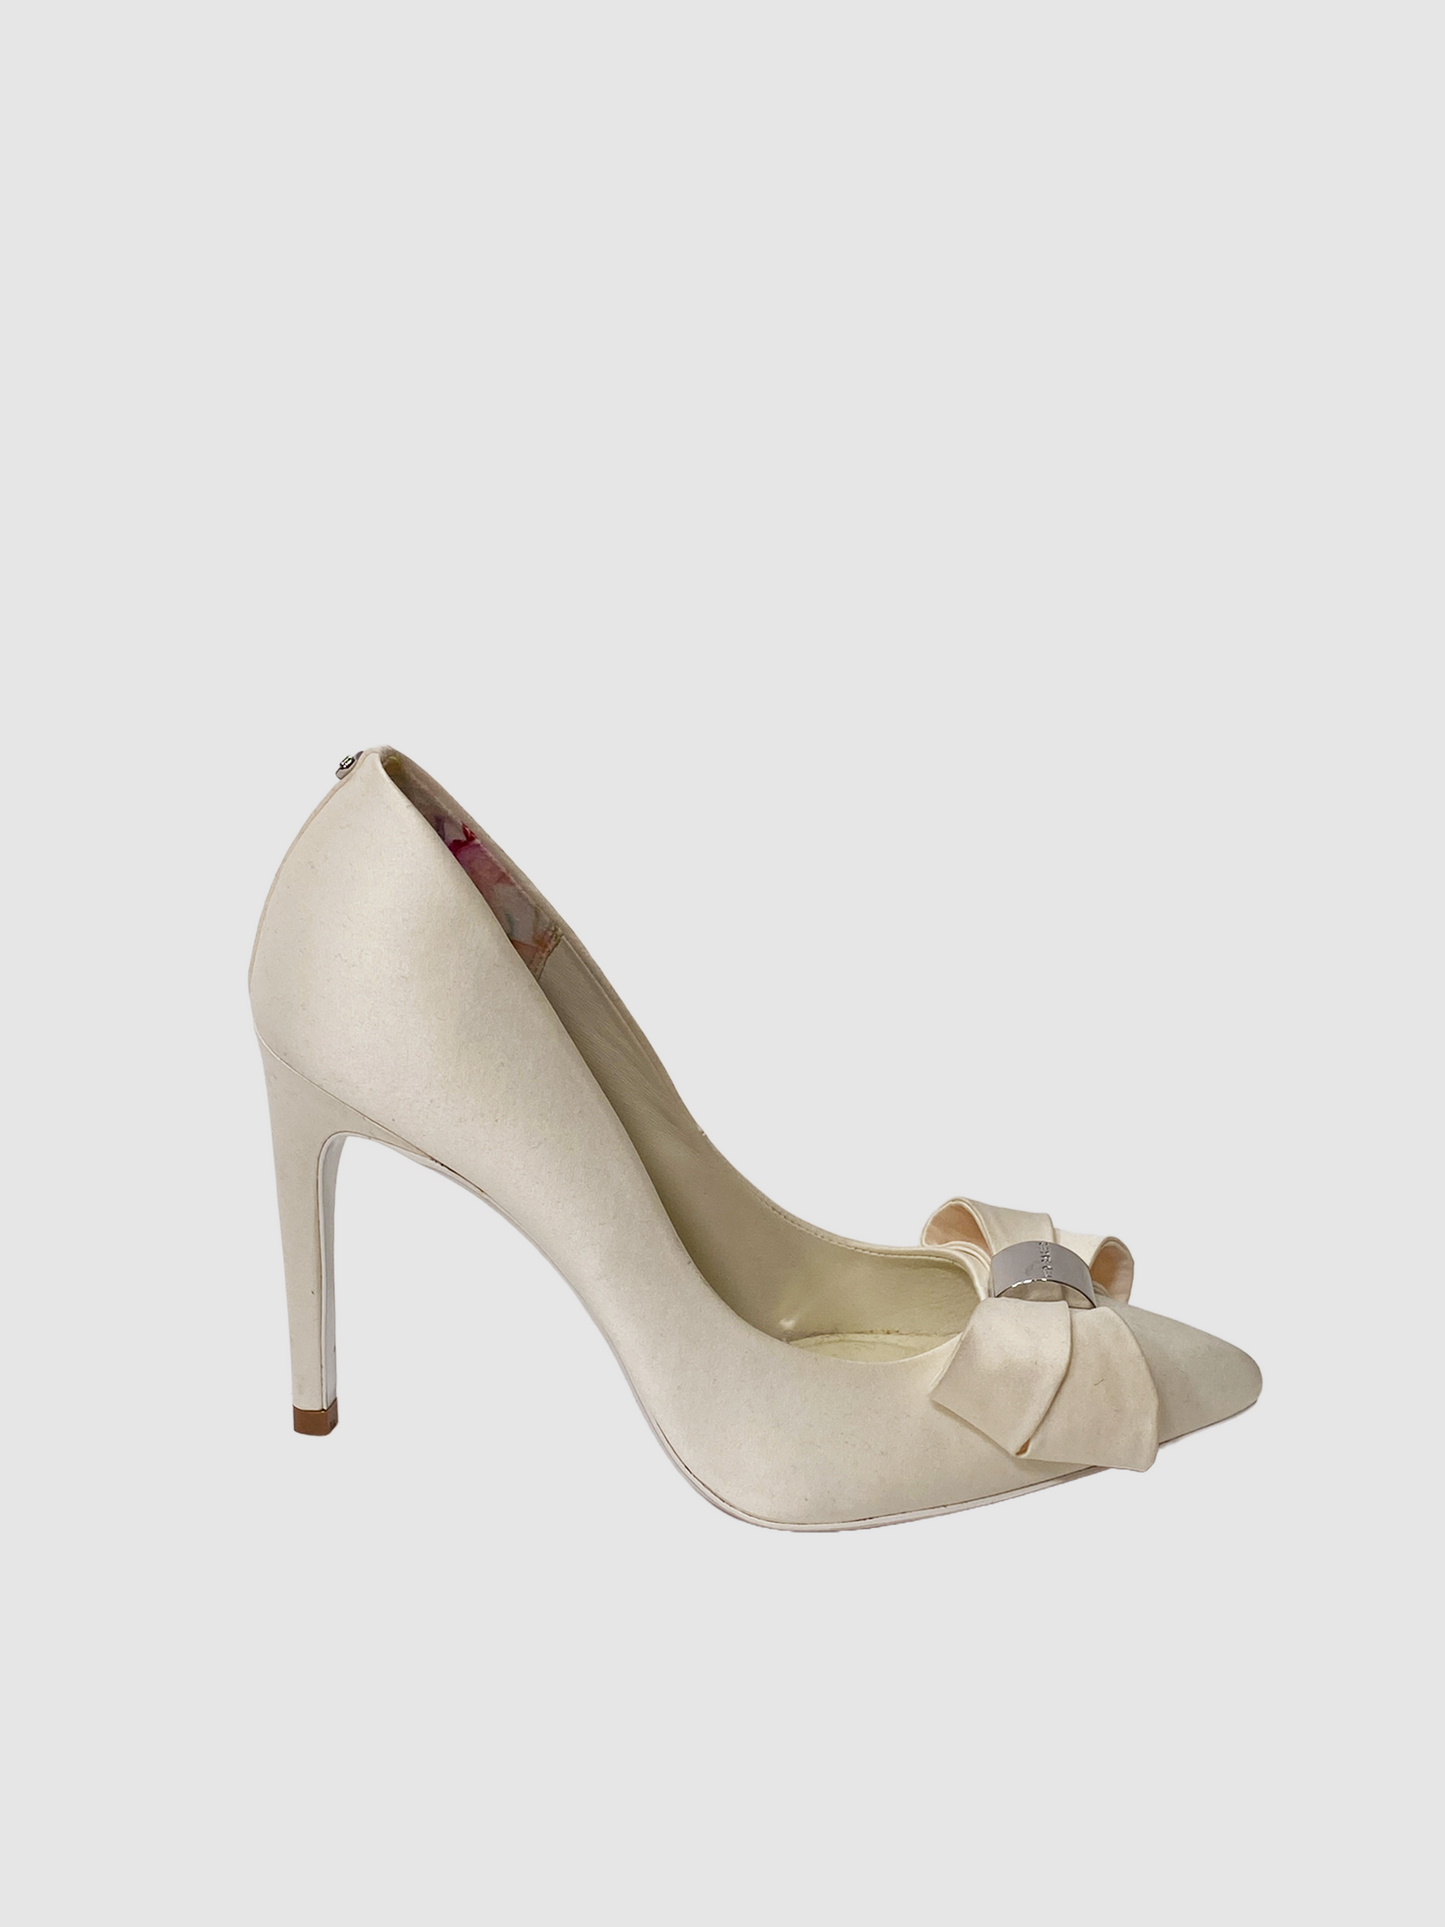 Satin Pumps with Bow - Size 38